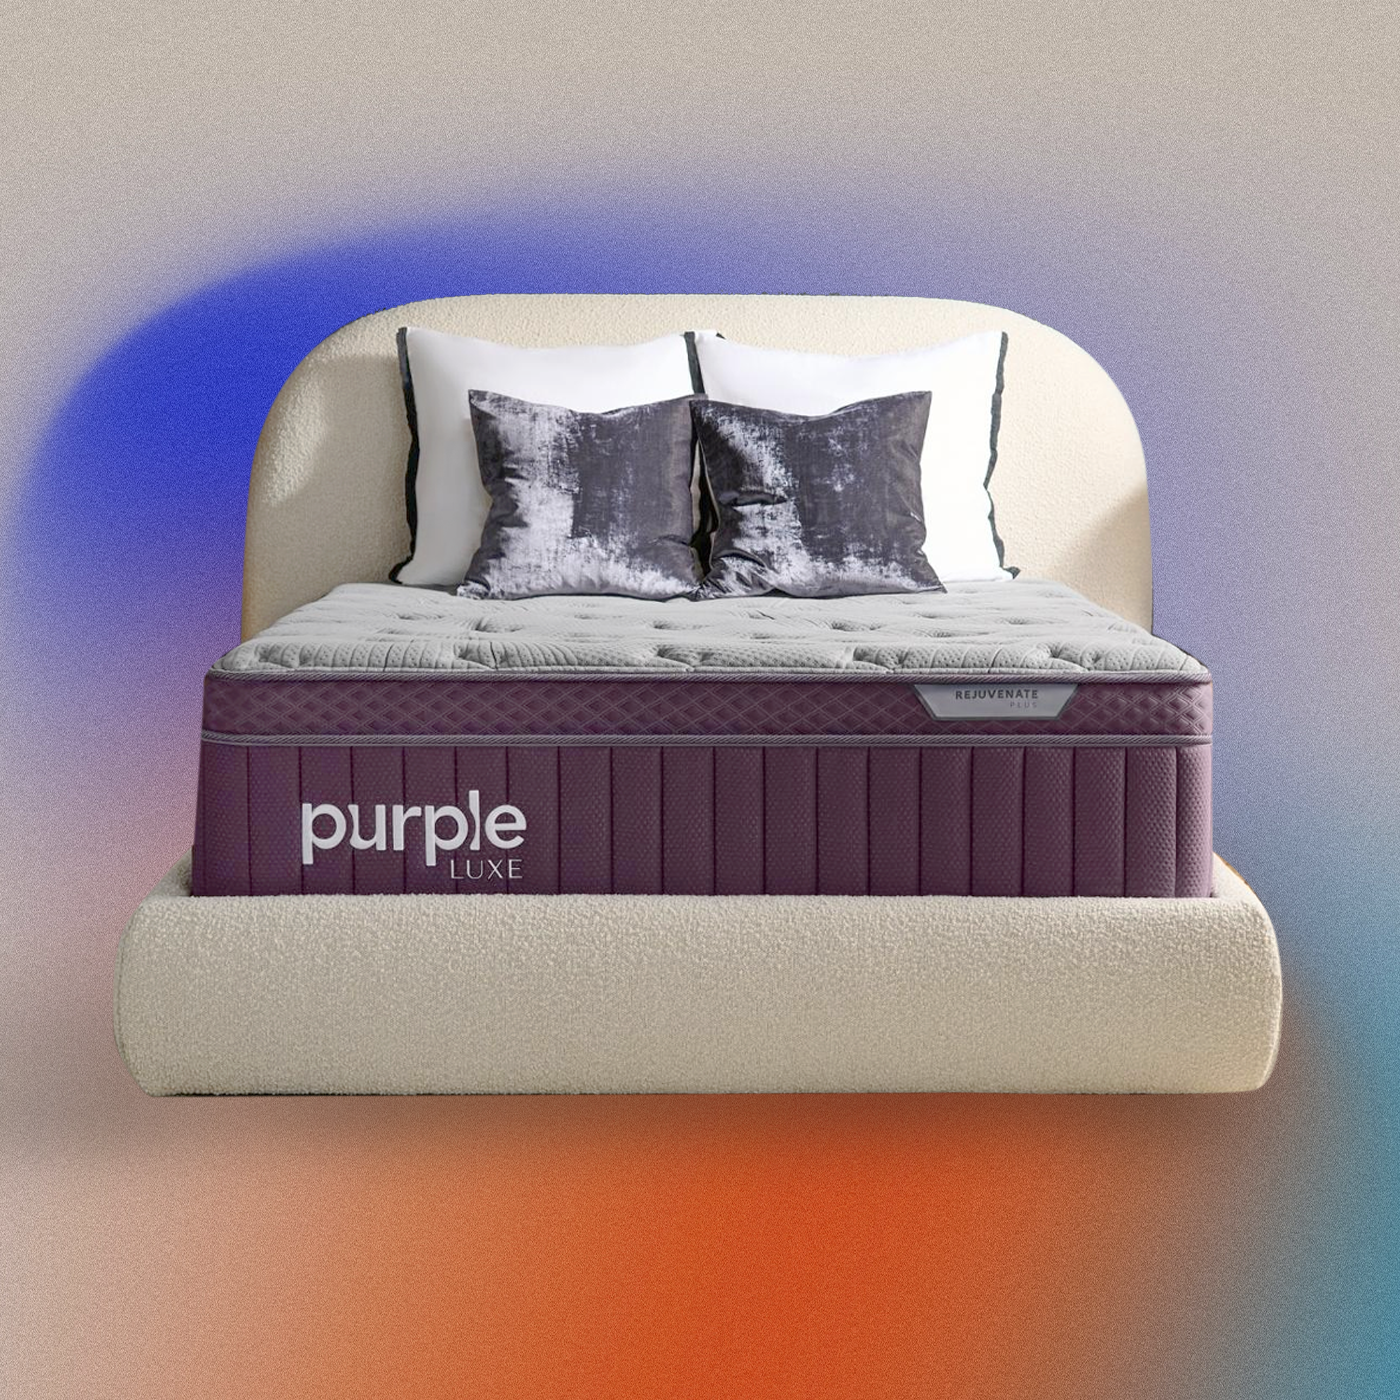 This Luxurious Mattress Will Have You Canceling Plans and Staying in Bed